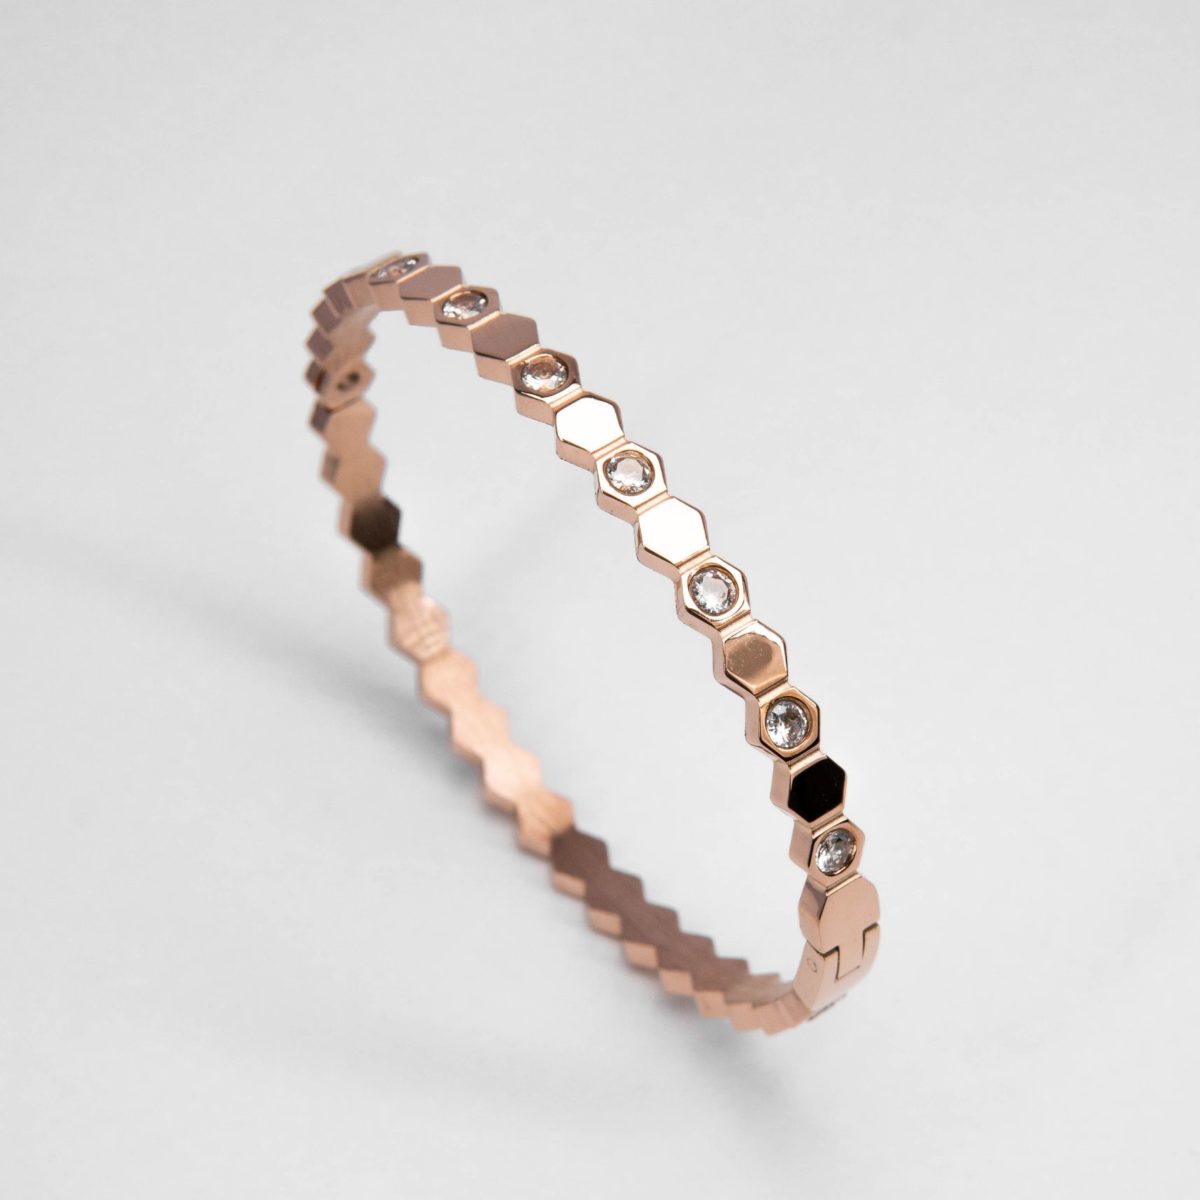 https://m.clubbella.co/product/larry-18-k-rose-gold-plated-bangle/ Larry 6